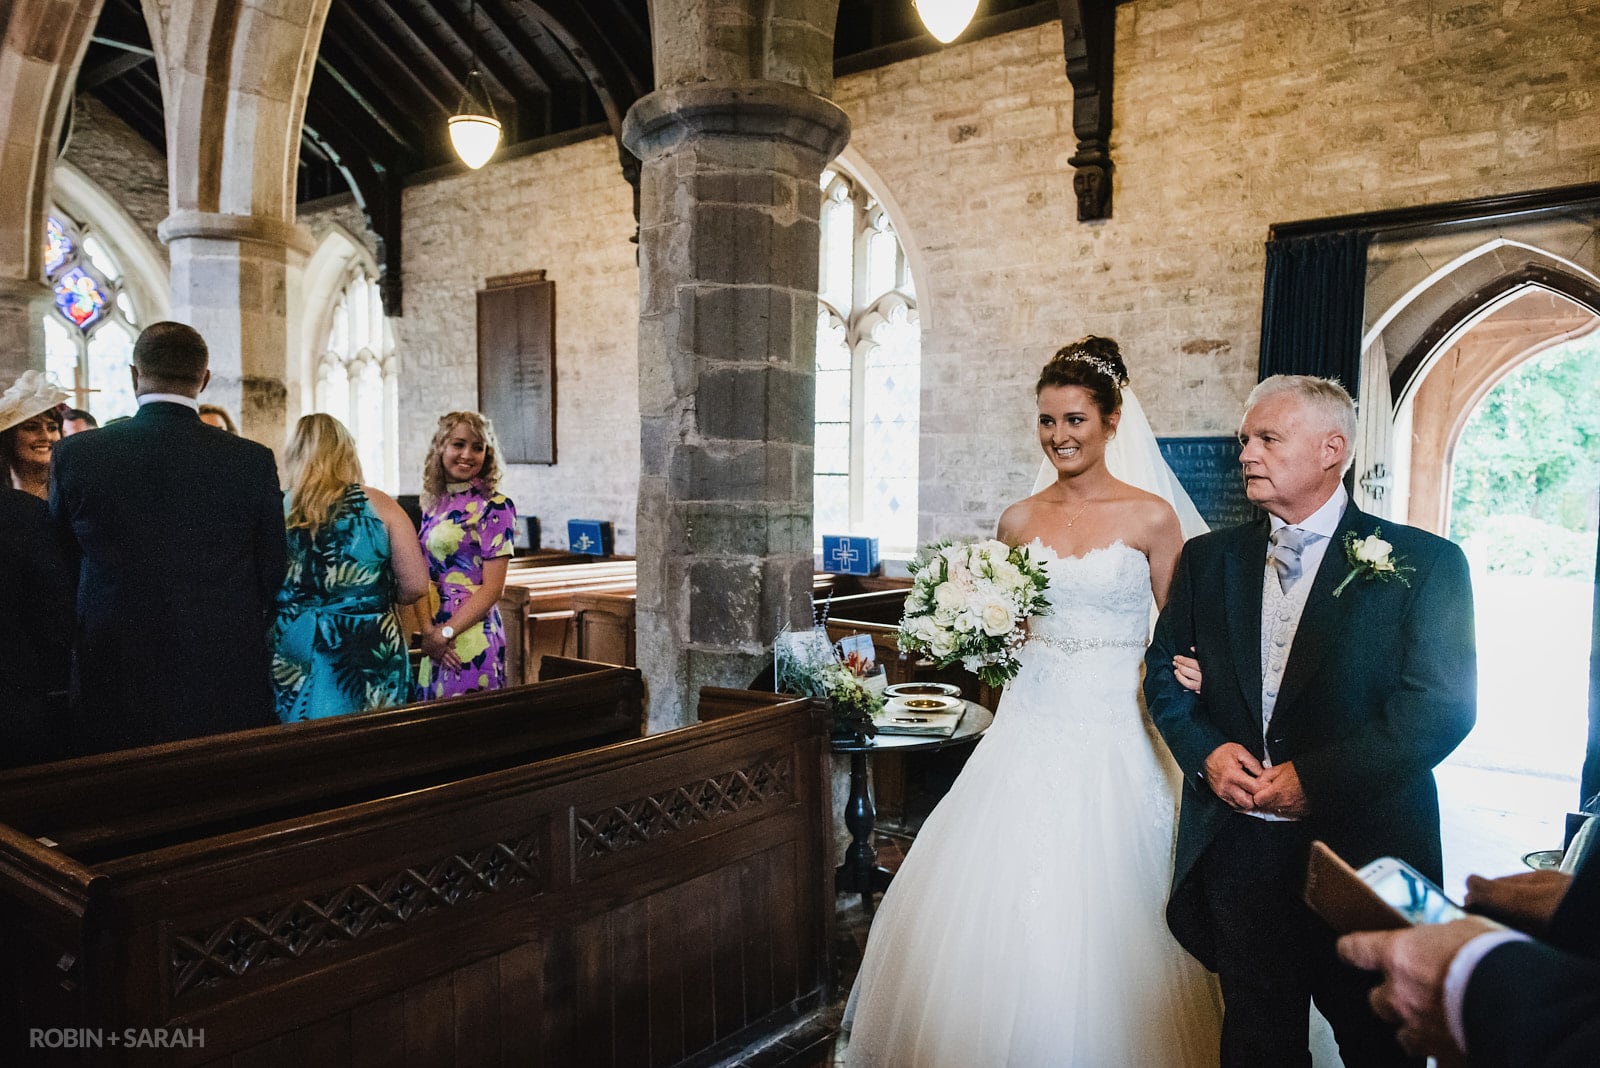 Bride and dad enter church wedding ceremony as guests turn around to look